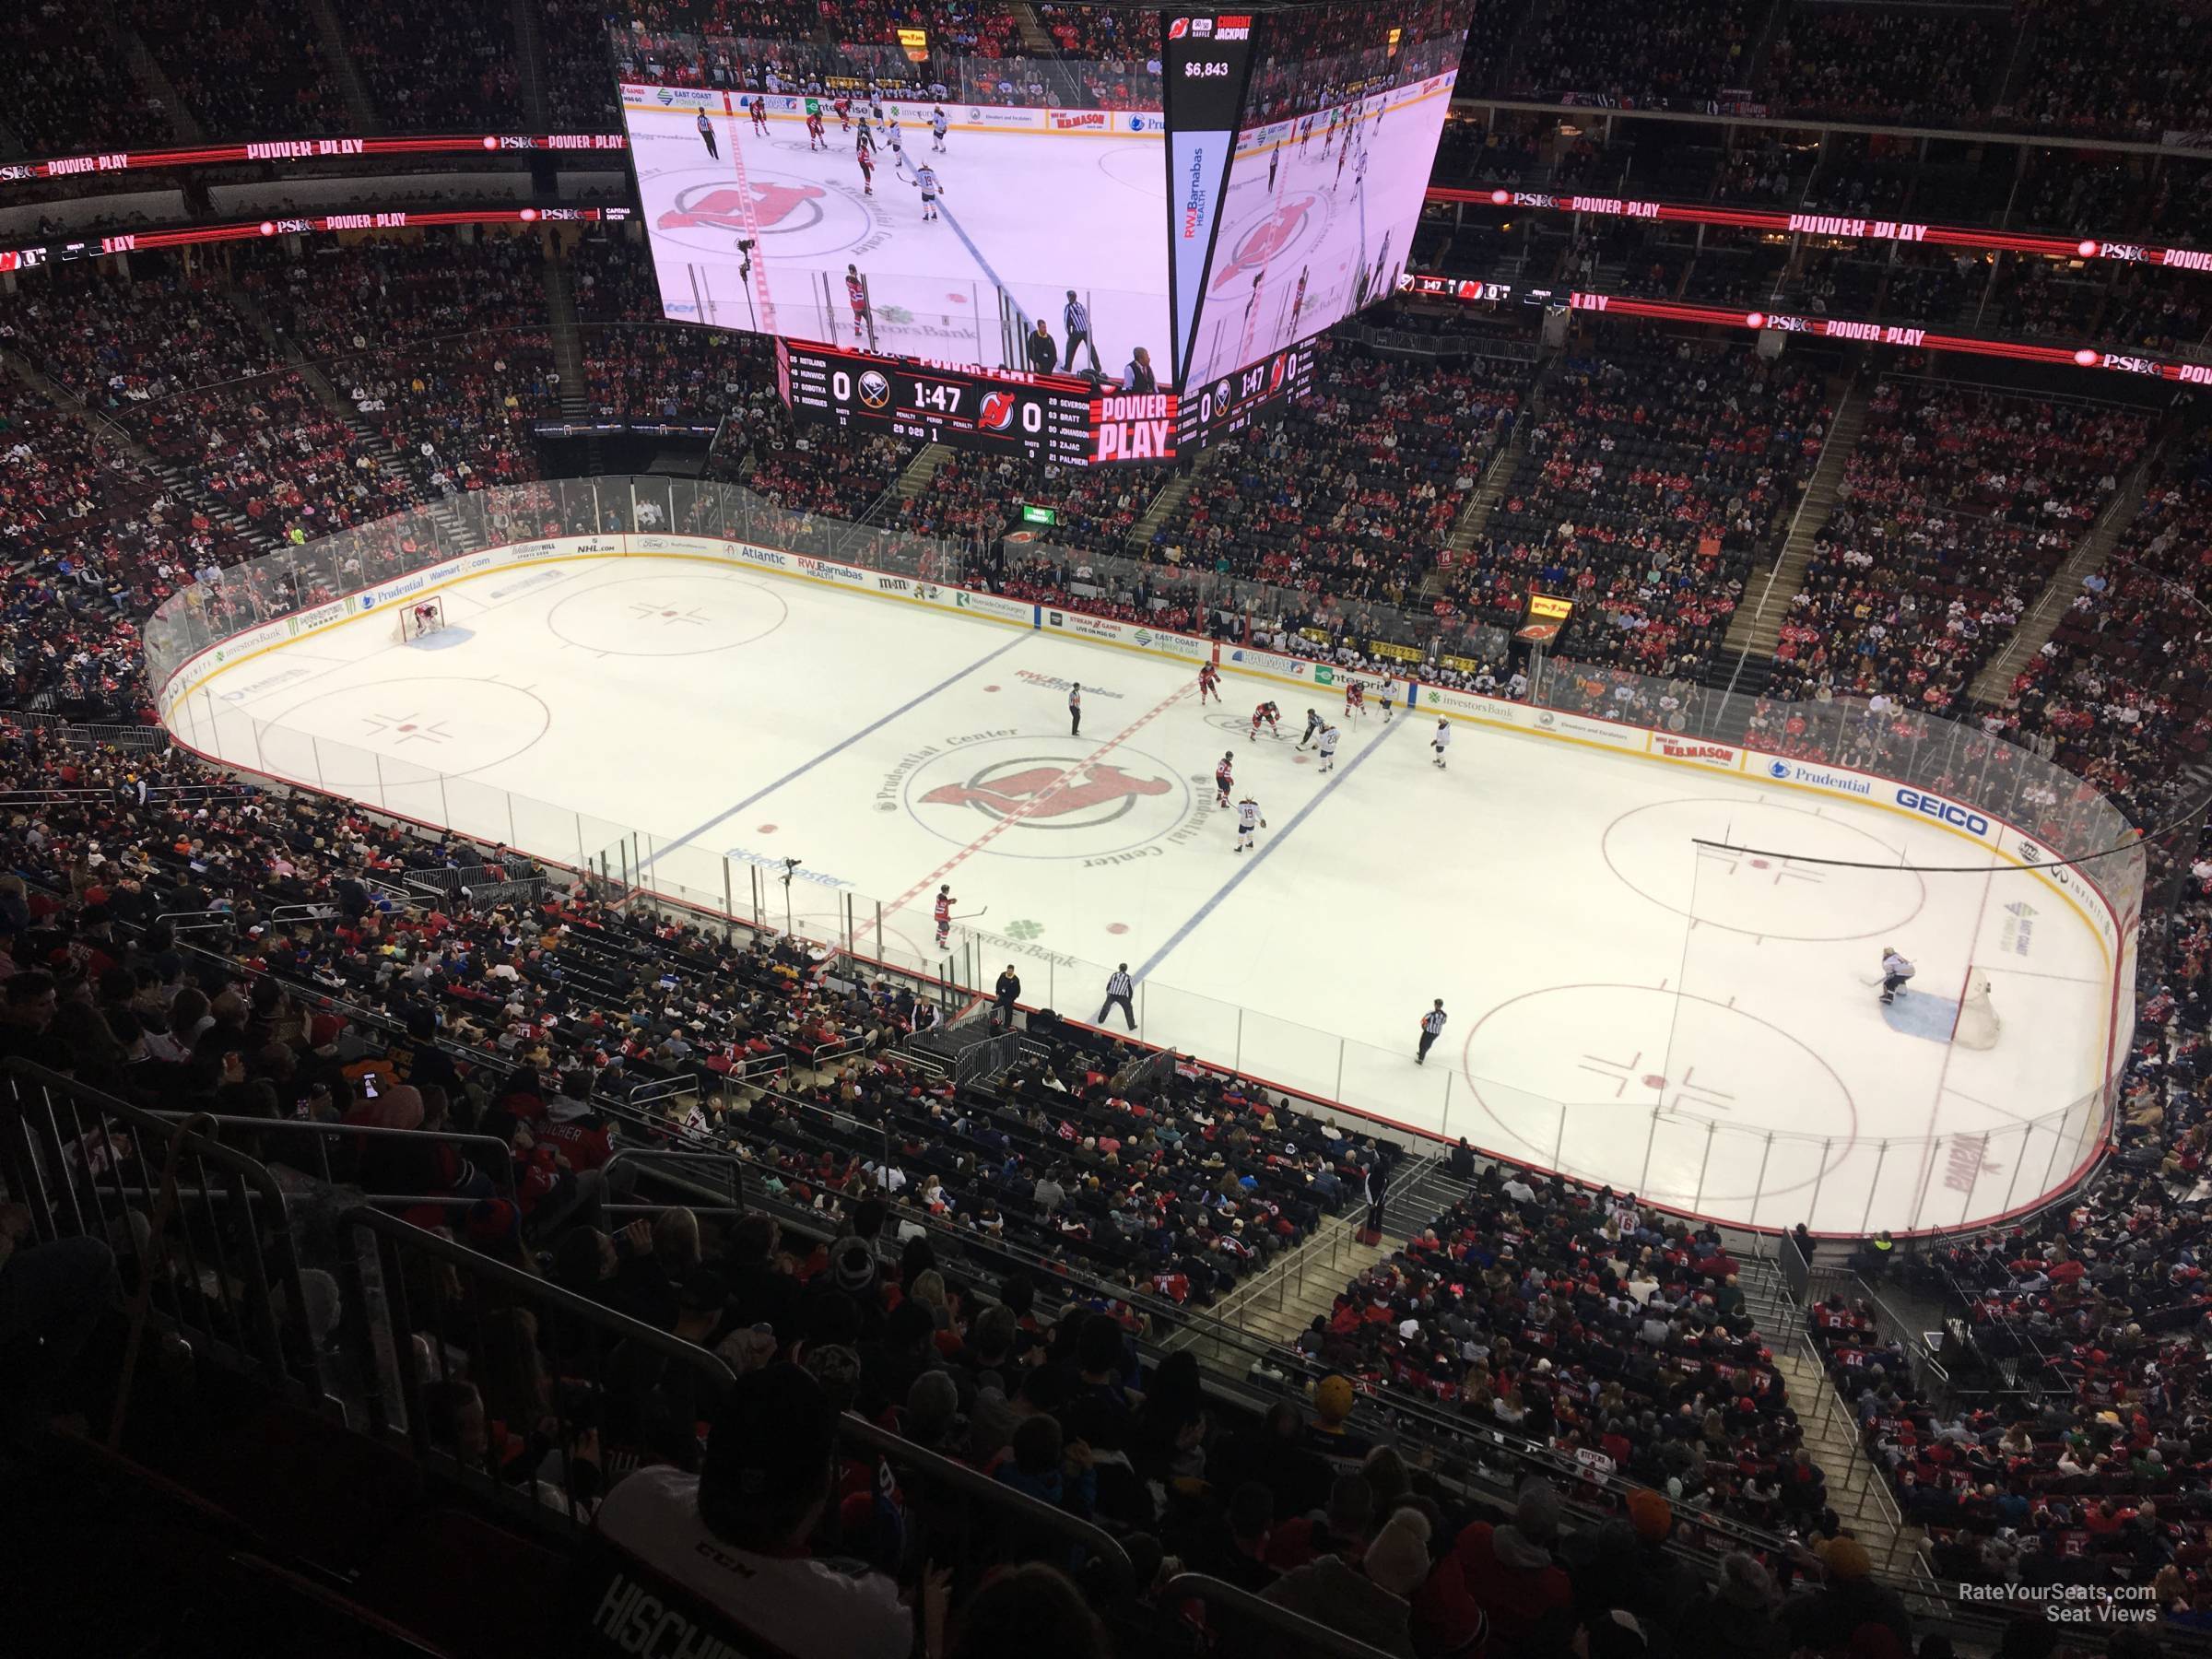 section 232, row 1 seat view  for hockey - prudential center